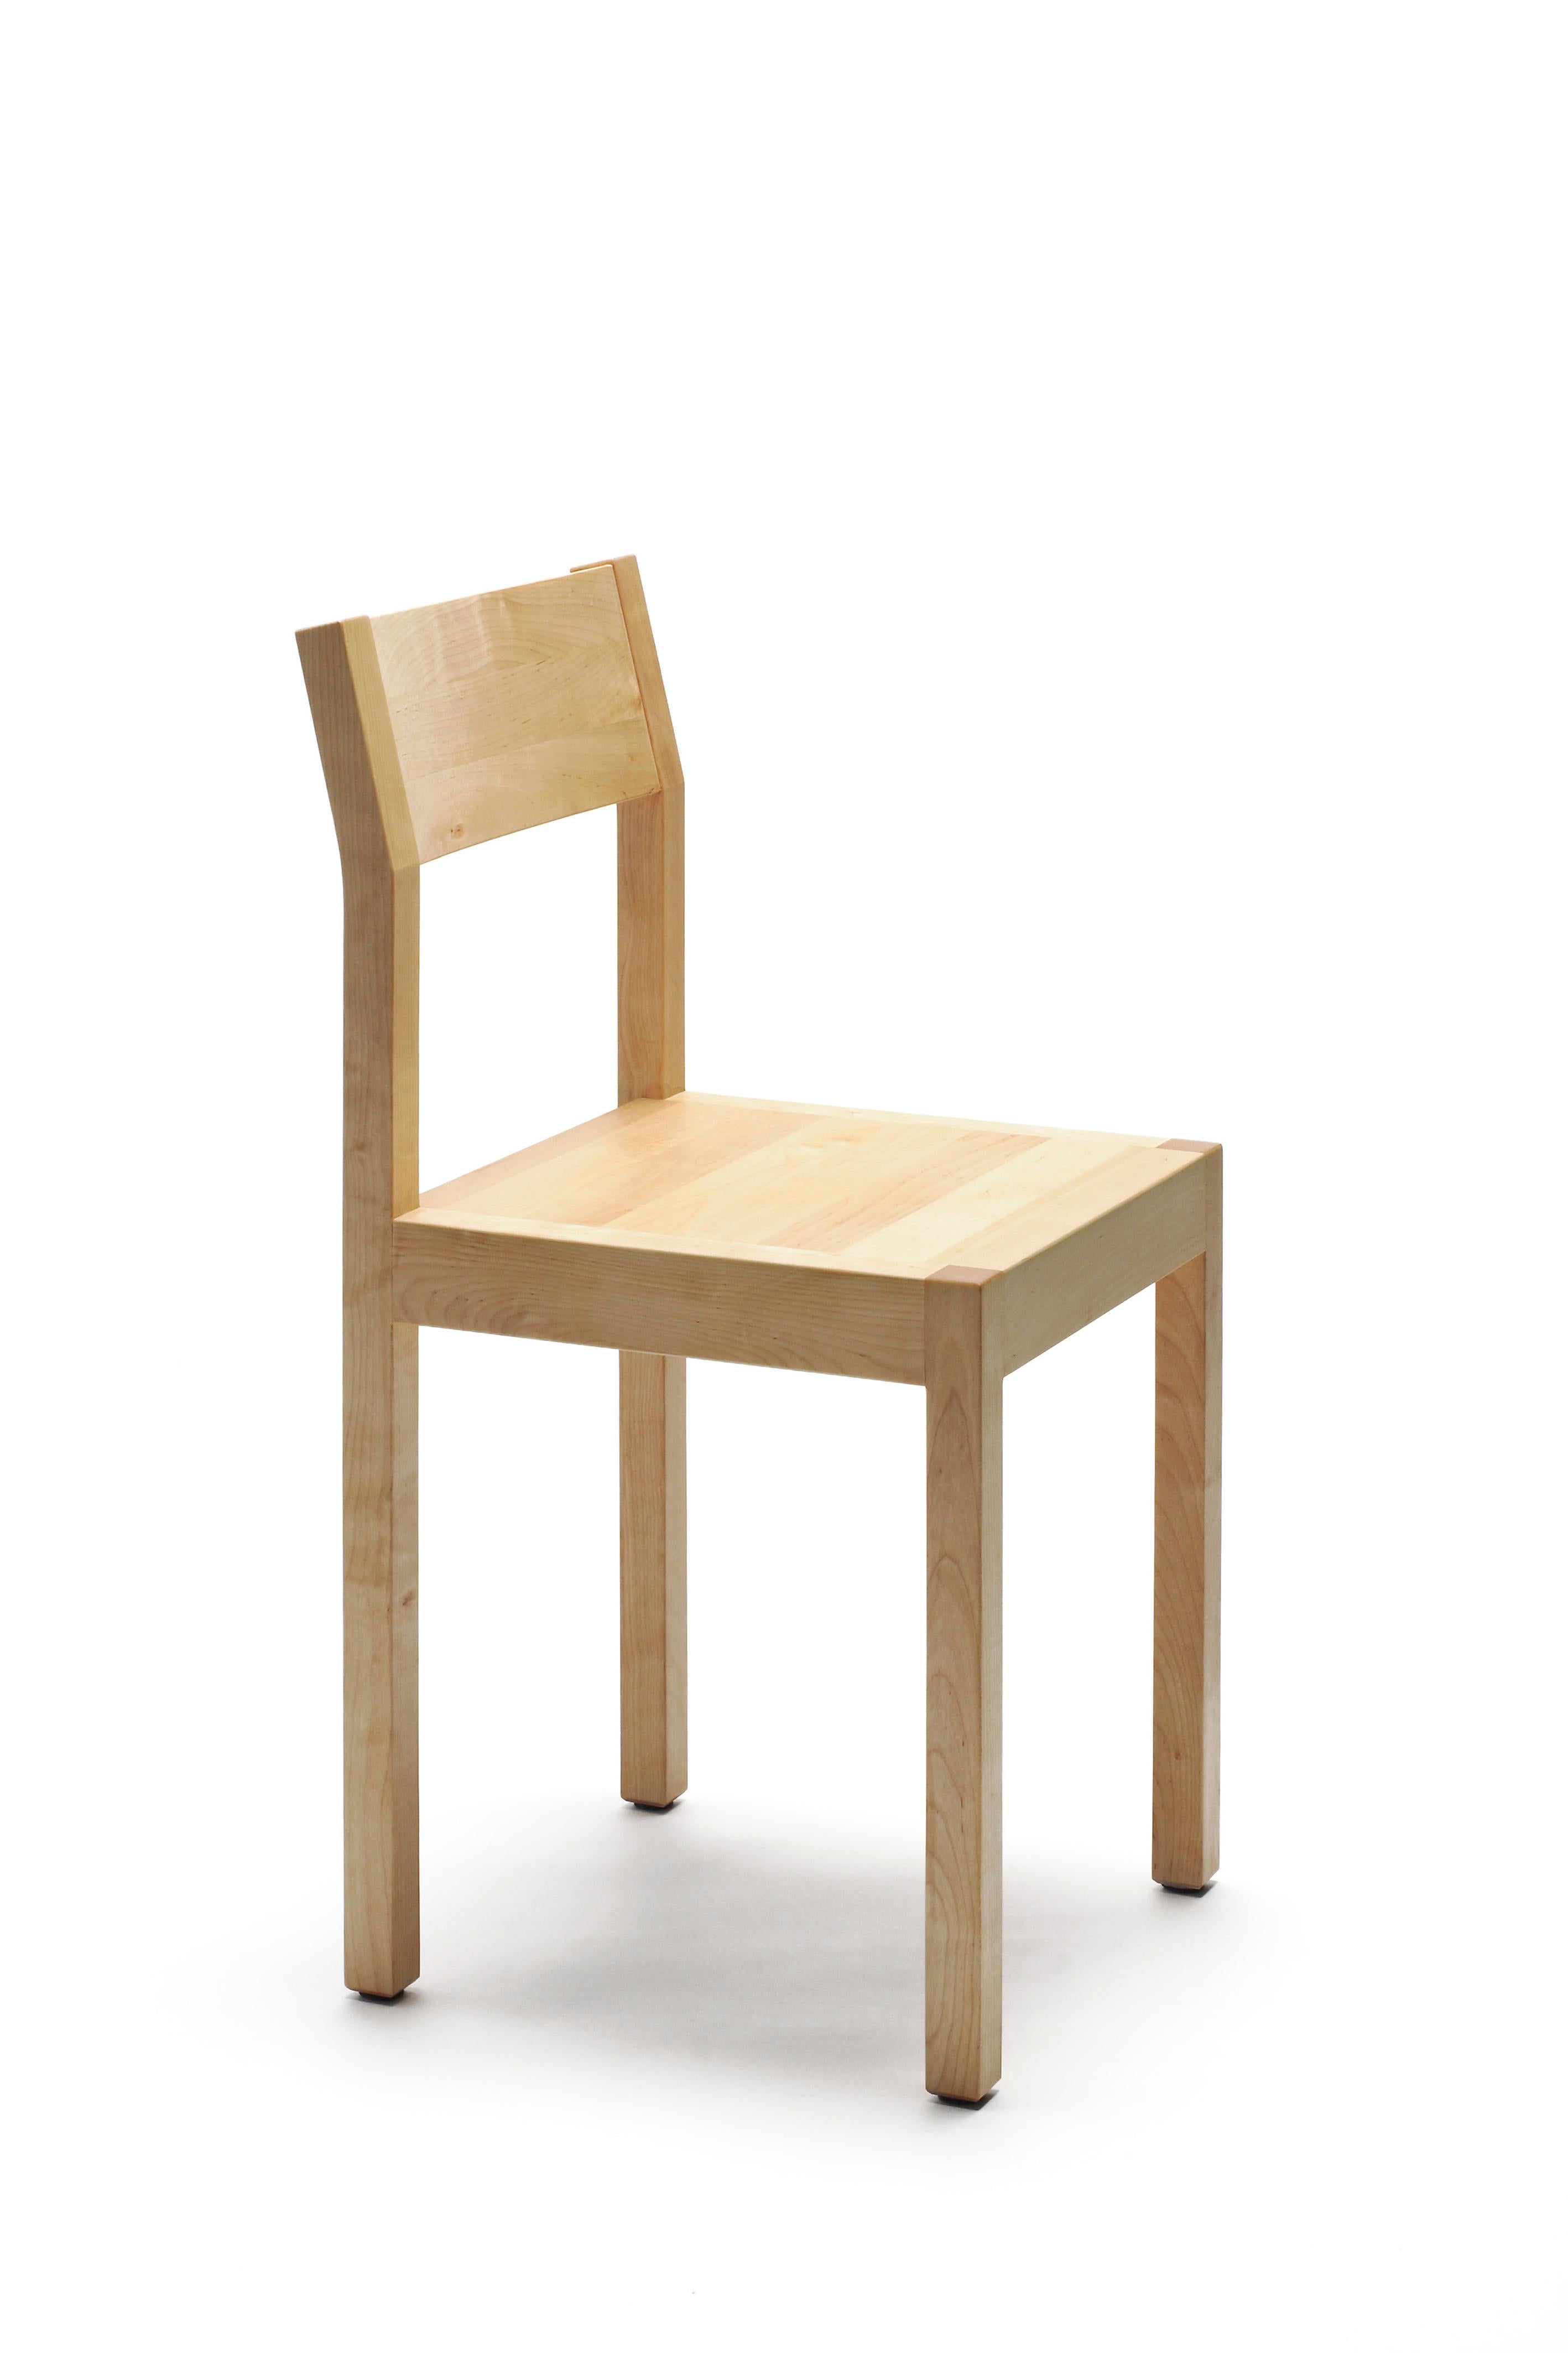 Seminar KVT1 is an archetype of a solid wooden Ostrobothnian chair, with light and well-proportioned structures. It was originally developed as a model piece for the design students by the founder of Nikari, master cabinet maker Kari Virtanen when